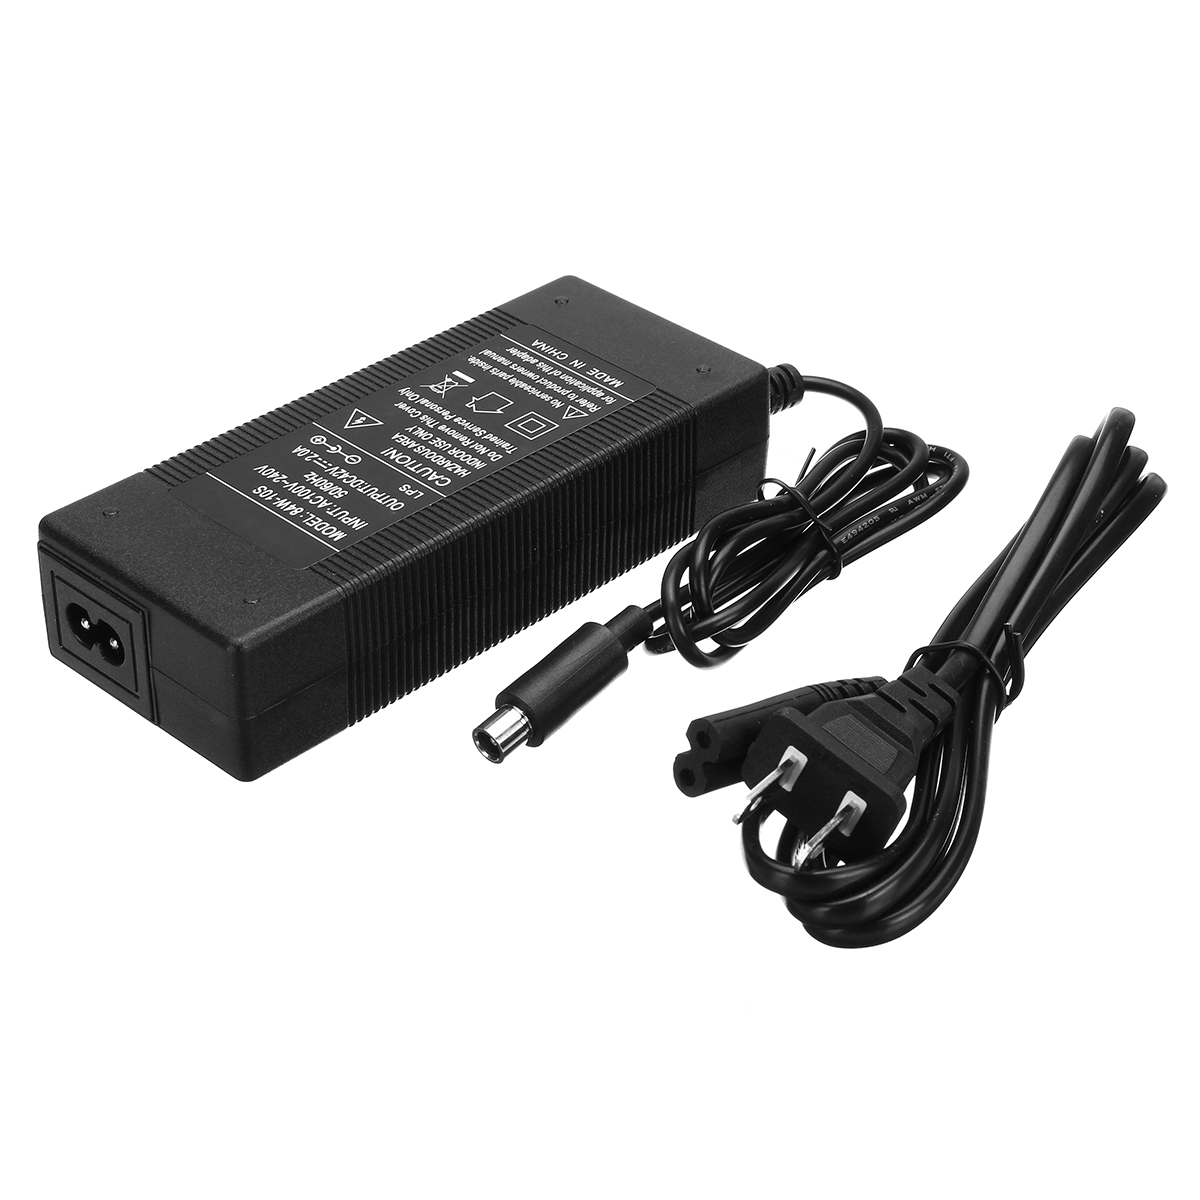 DC42V-17A-Lithium-Battery-Charger-Battery-Equipment-for-Scooter-For-Ninebot-Scooter-1417293-9